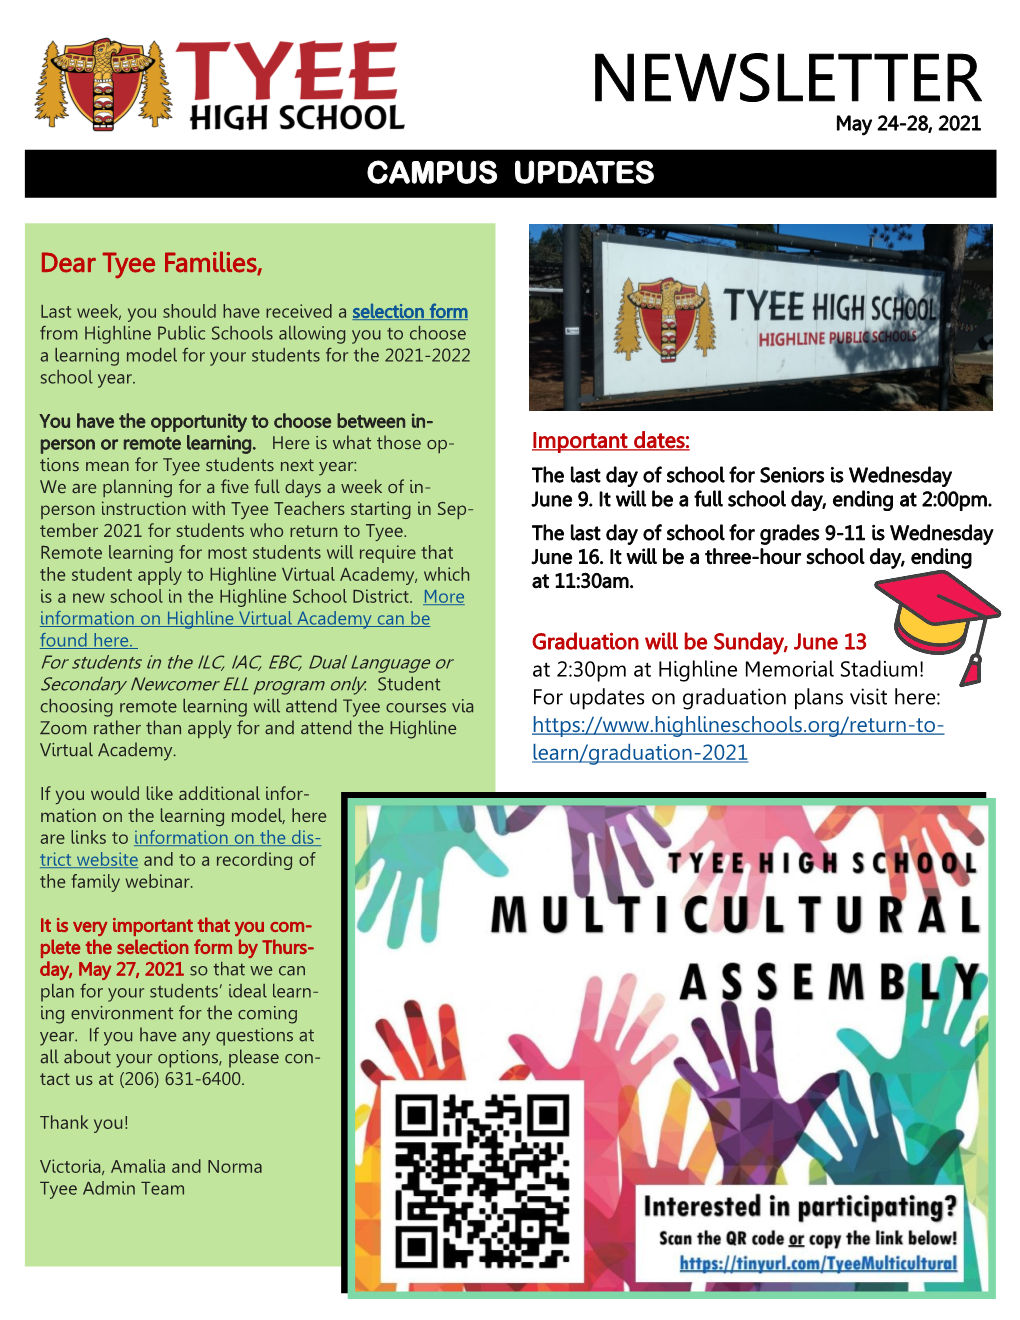 NEWSLETTER May 24-28, 2021 CAMPUS UPDATES